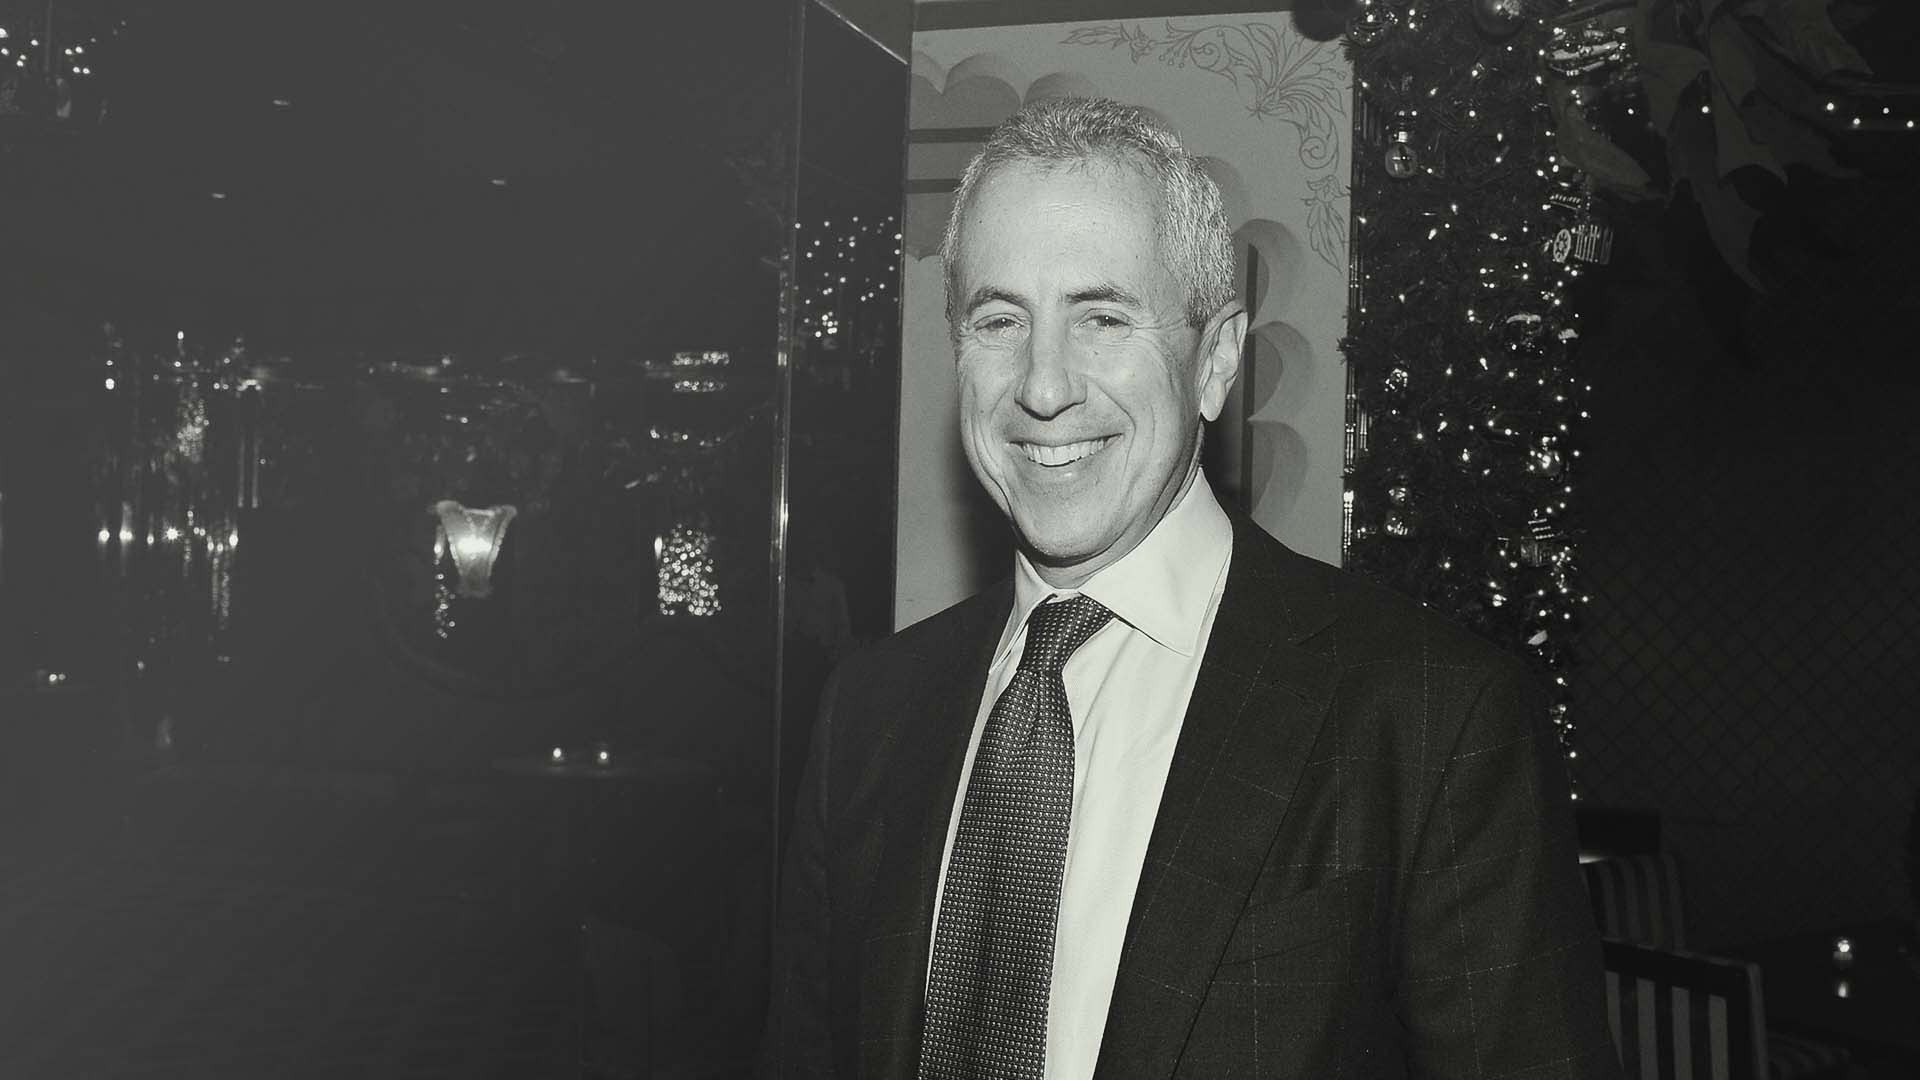 Danny Meyer Is Stepping Down as CEO of Union Square Hospitality. What You Can Learn From His 37-Year Tenure